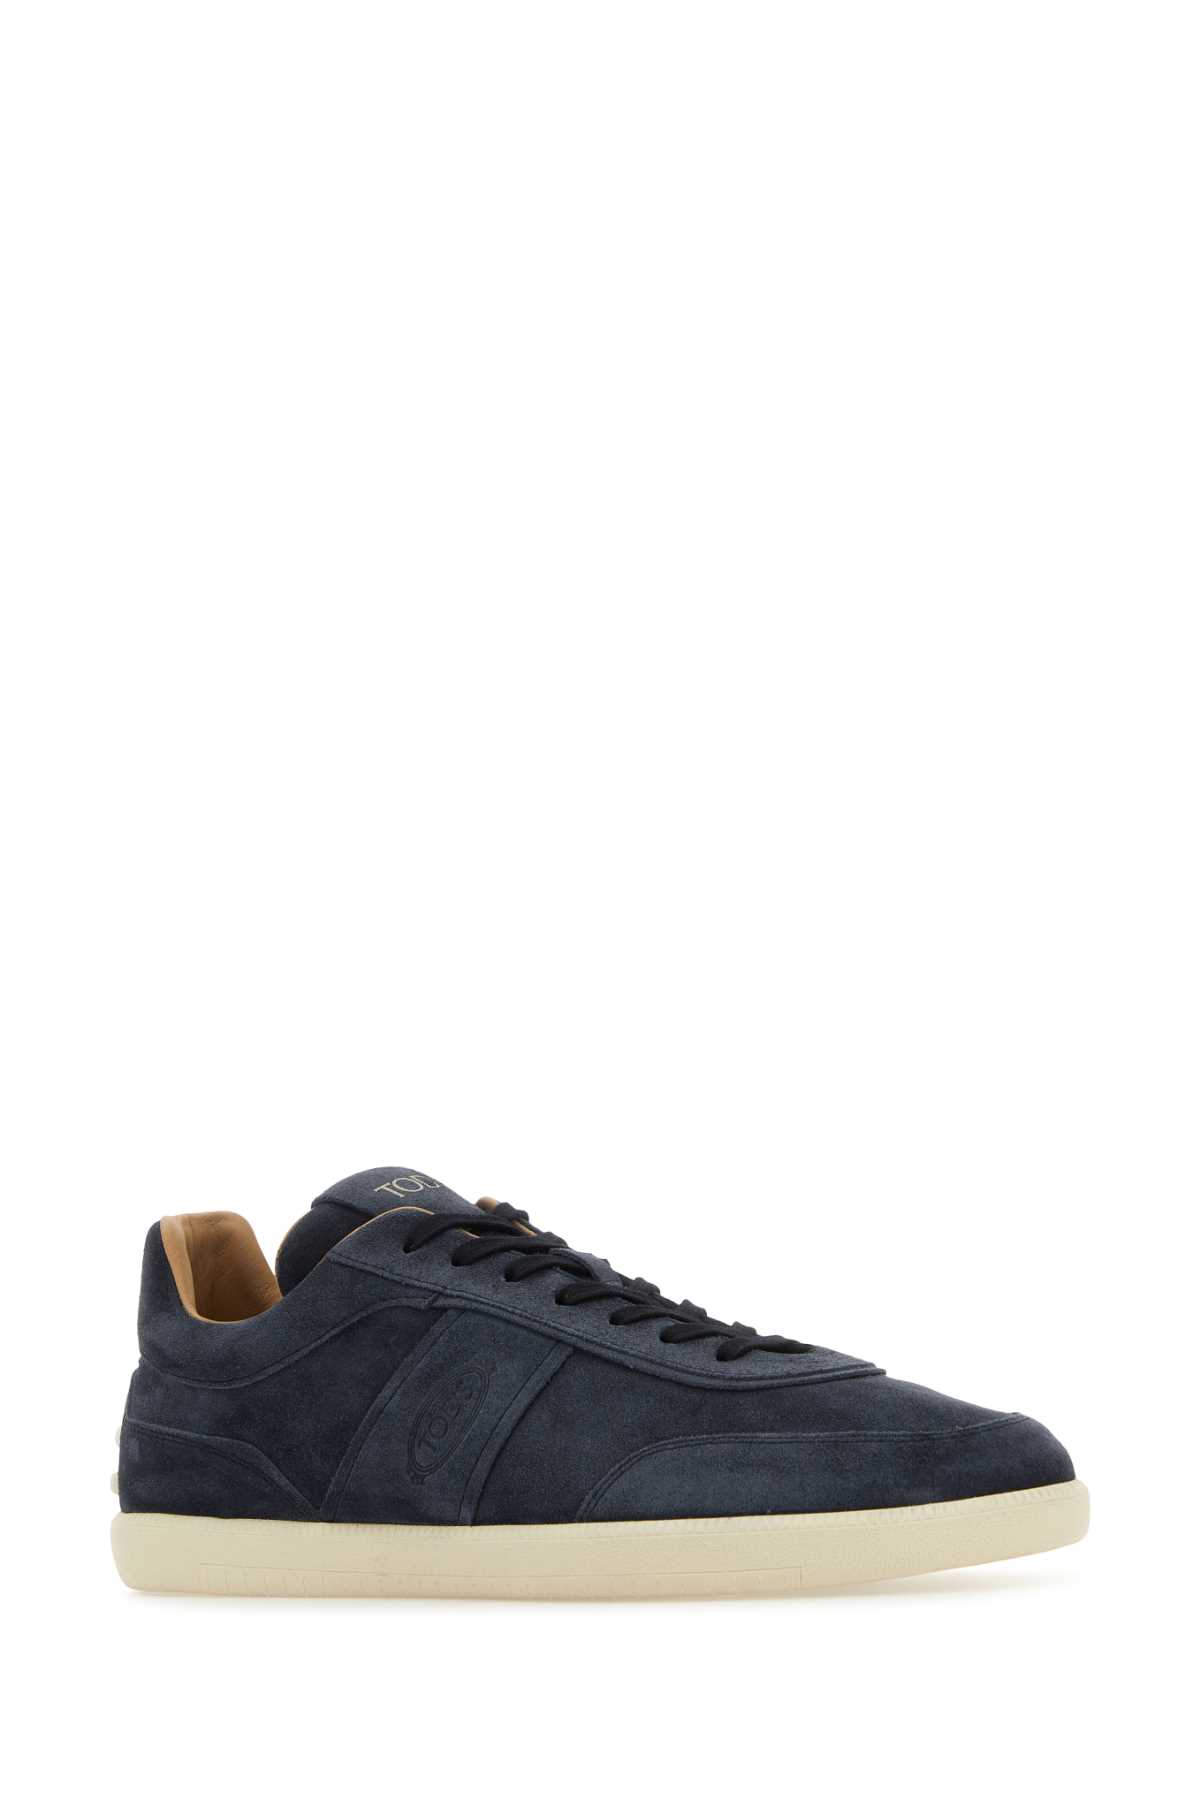 Shop Tod's Navy Blue Suede Tabs Sneakers